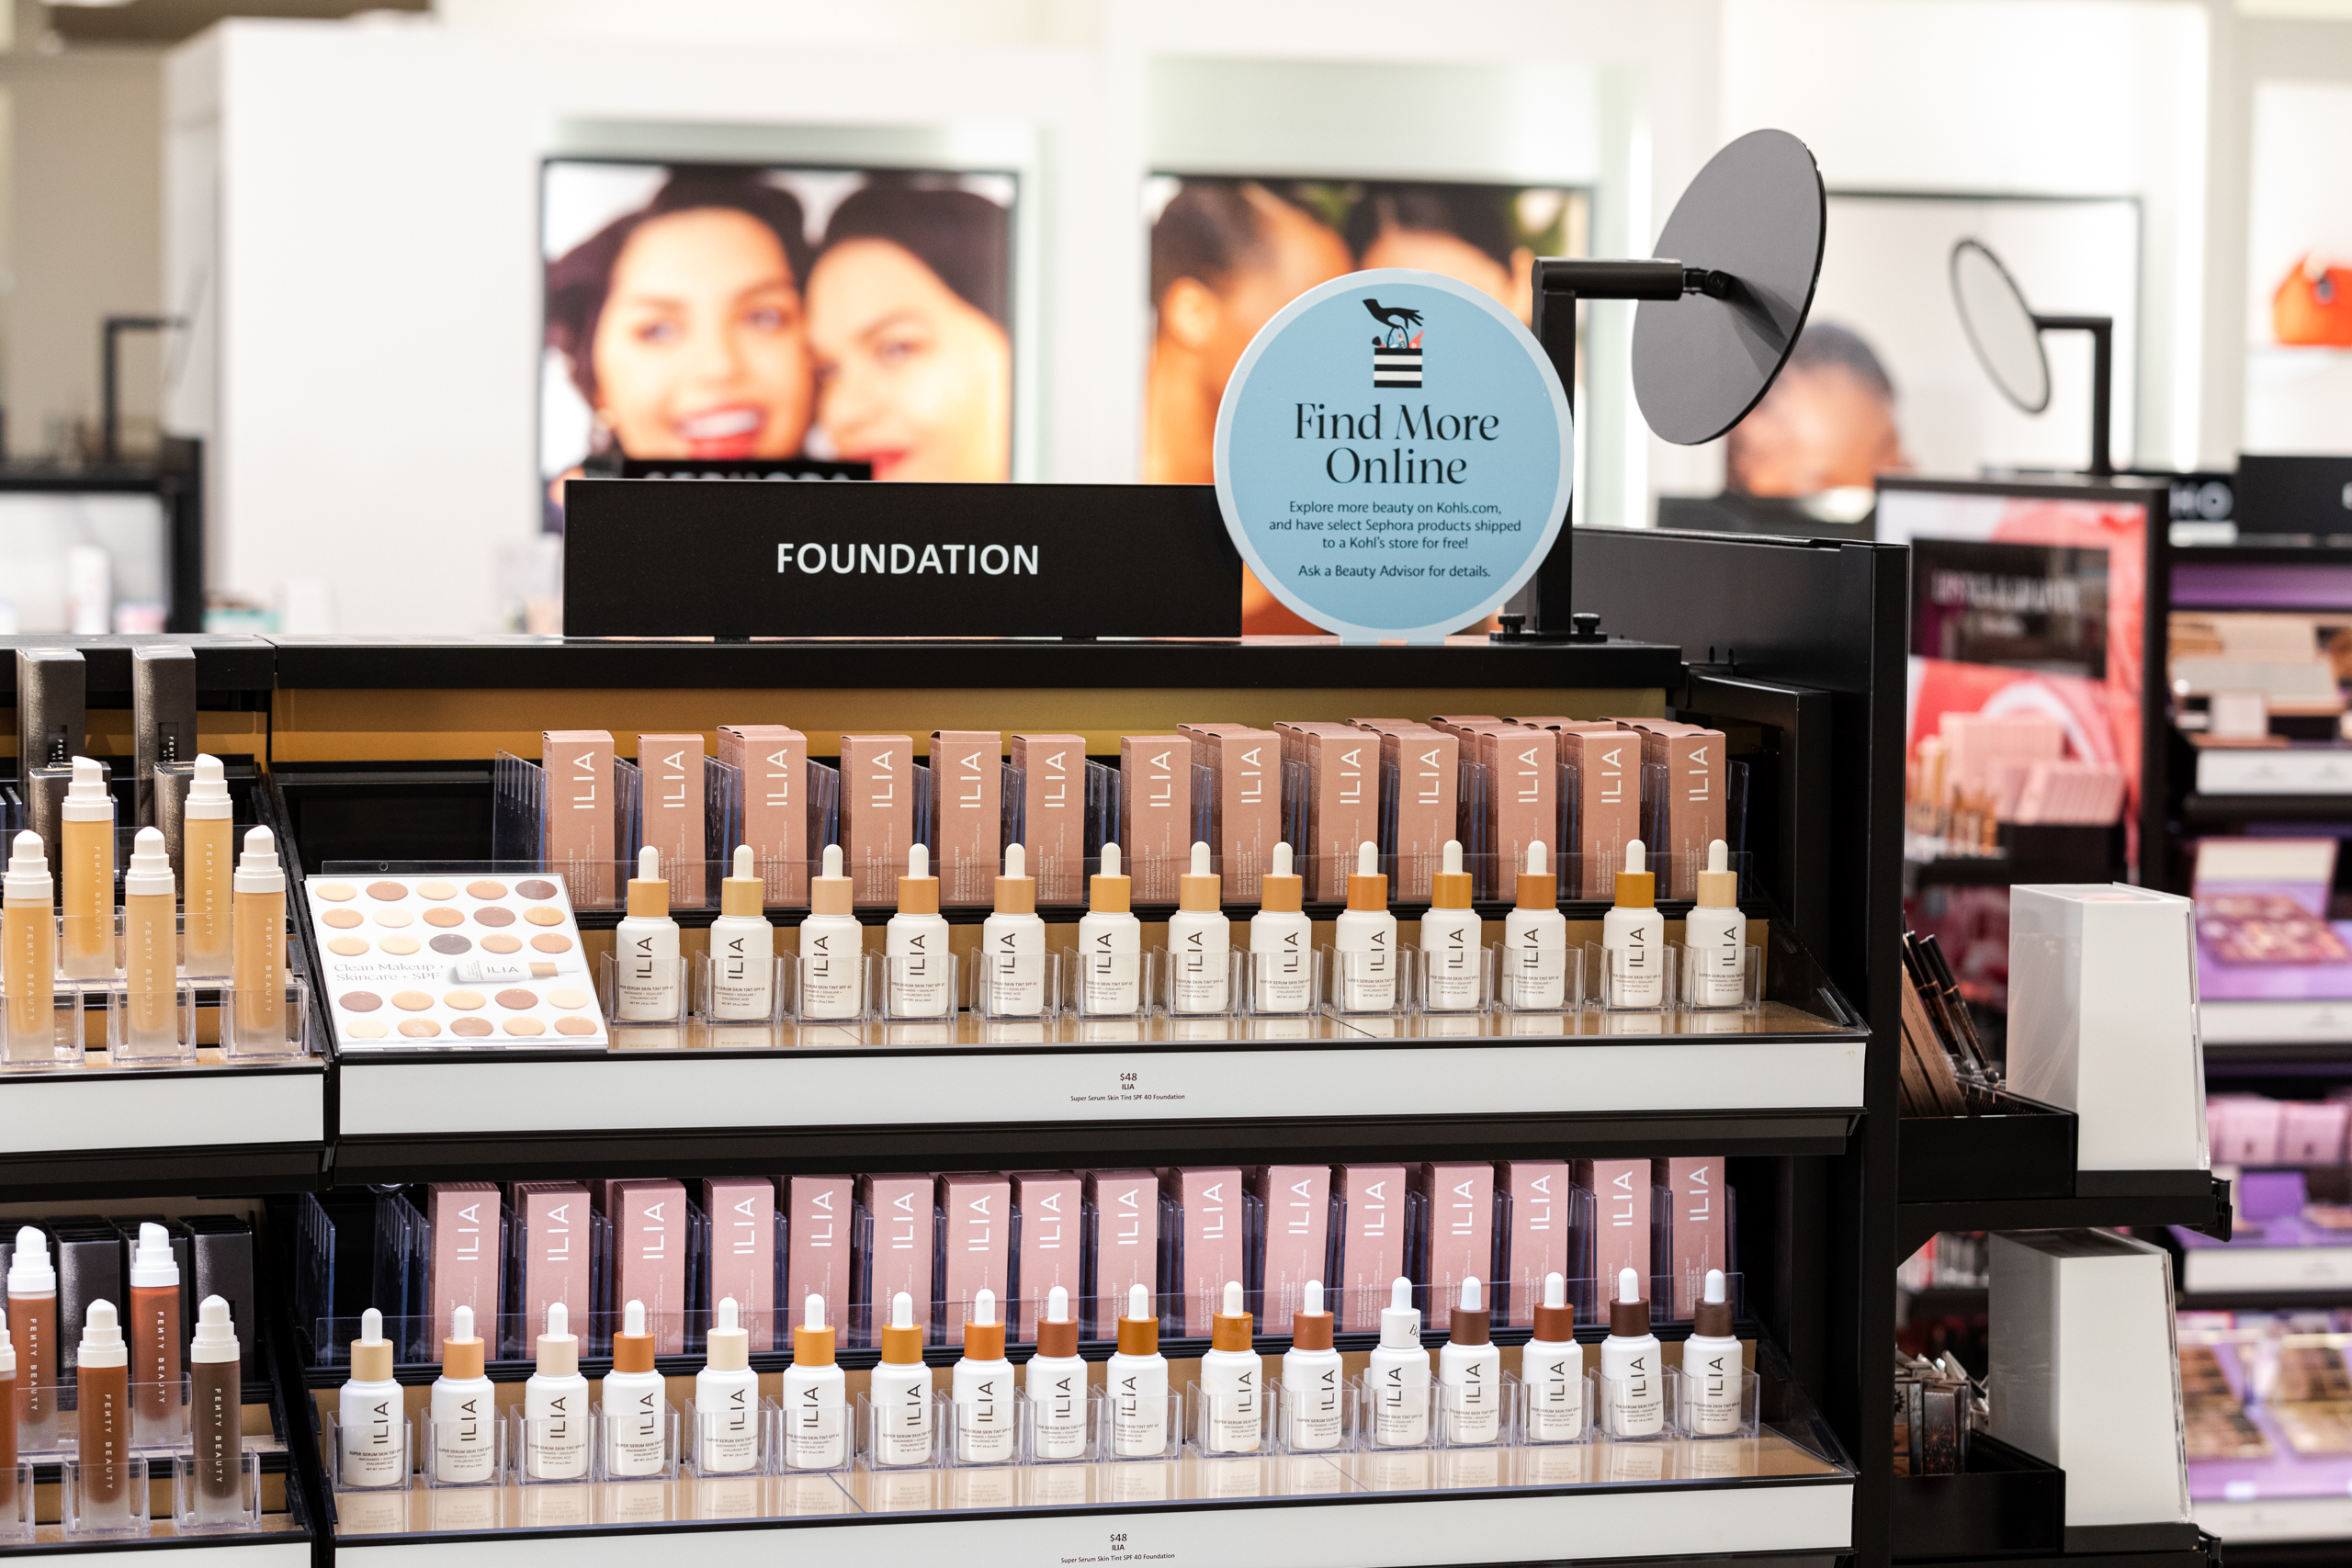 Sephora expands into 3 more Kohl's stores in NJ